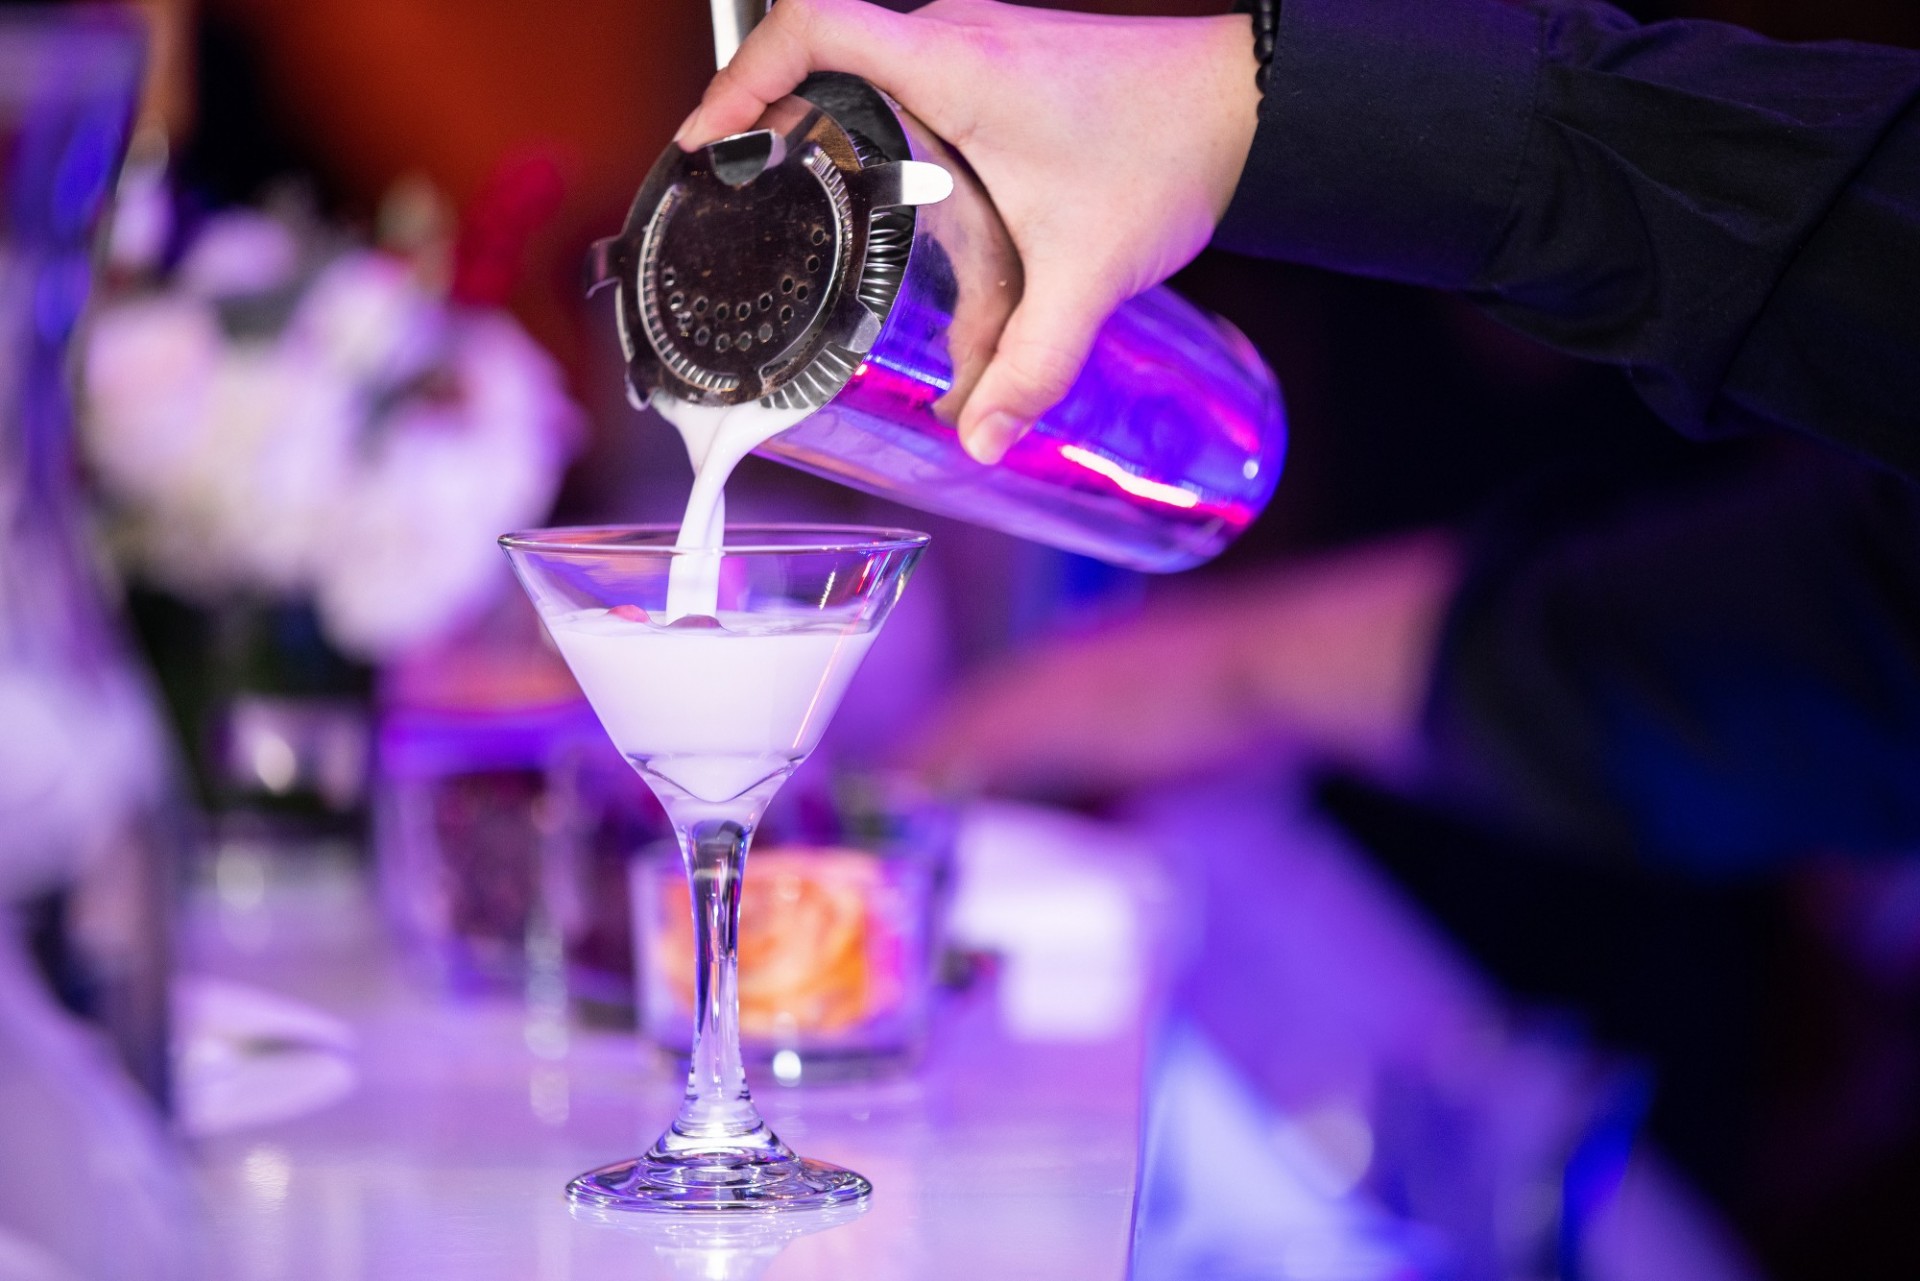 A bartender pours a white drink from a cocktail shaker into a martini glass